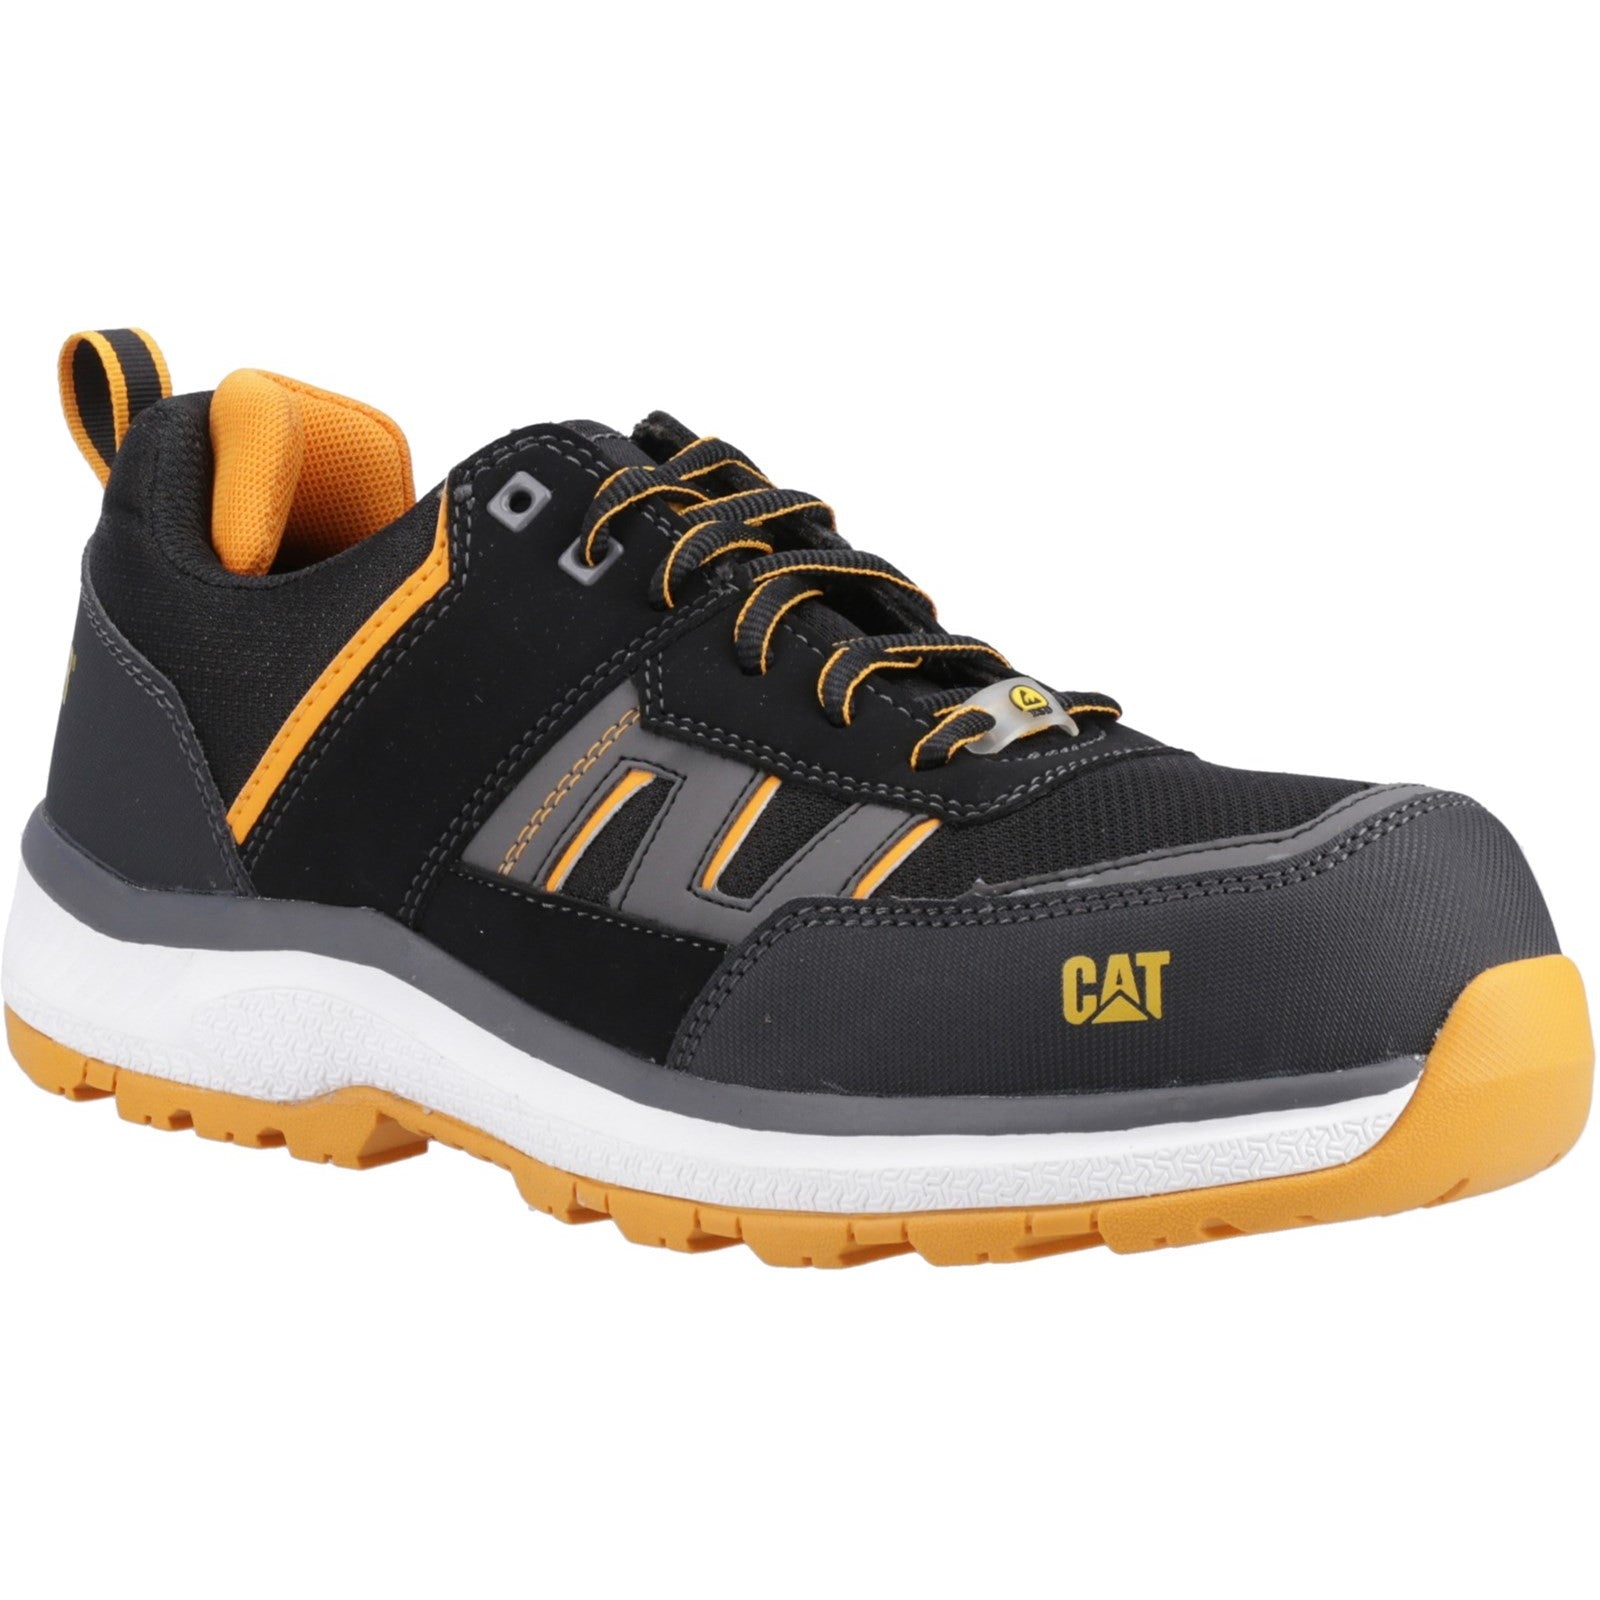 Caterpillar Accelerate S3 Safety Trainer